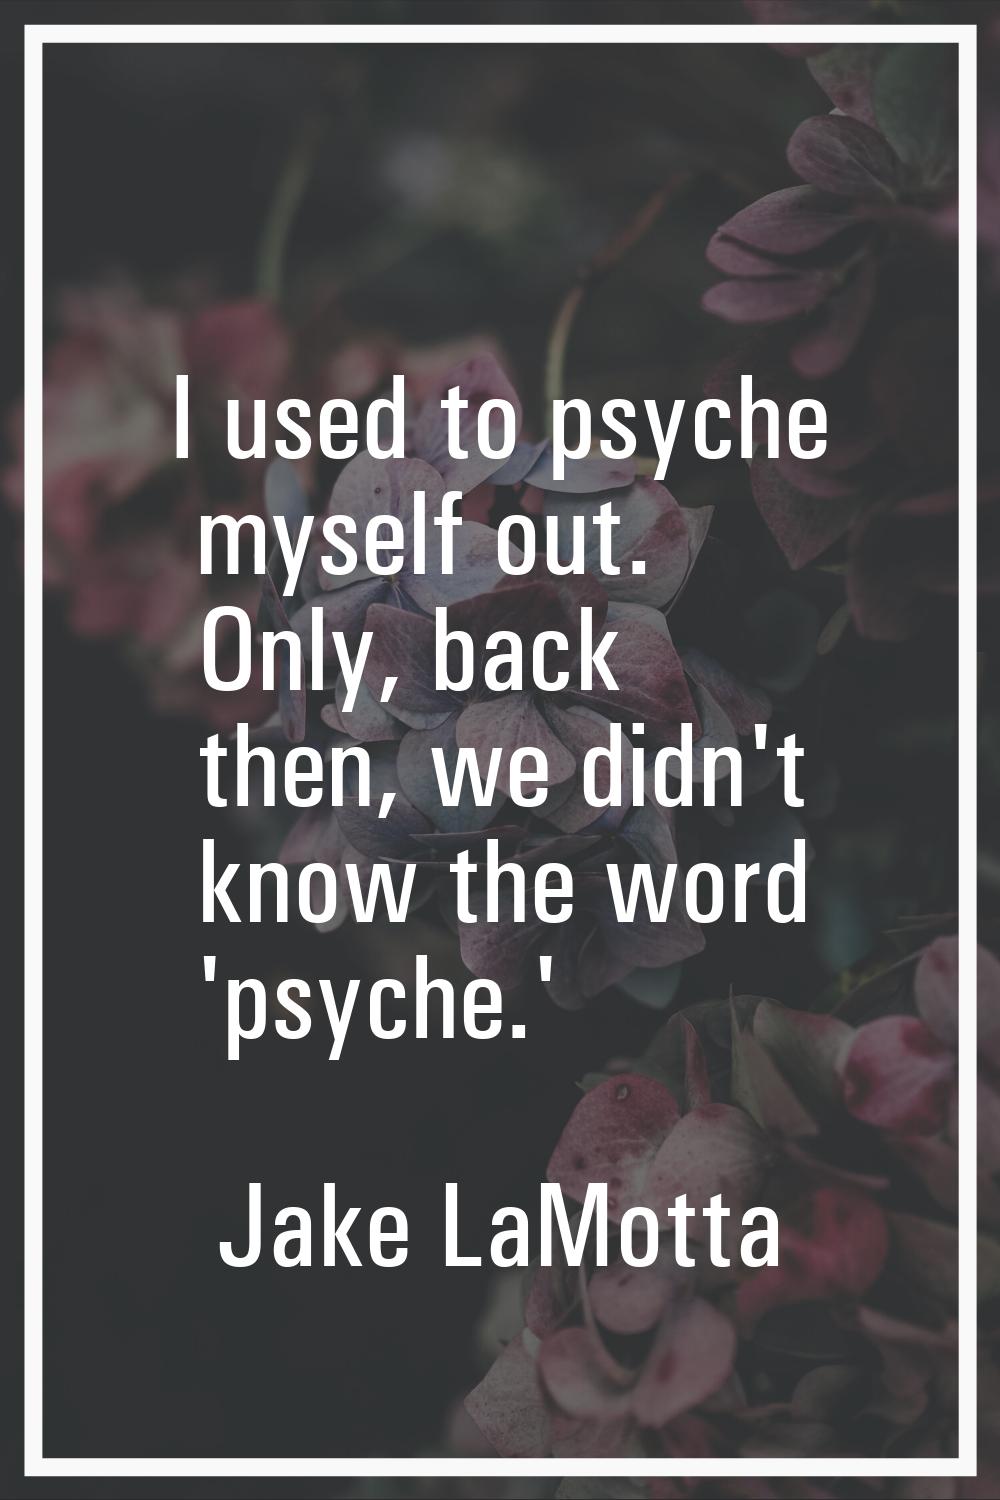 I used to psyche myself out. Only, back then, we didn't know the word 'psyche.'